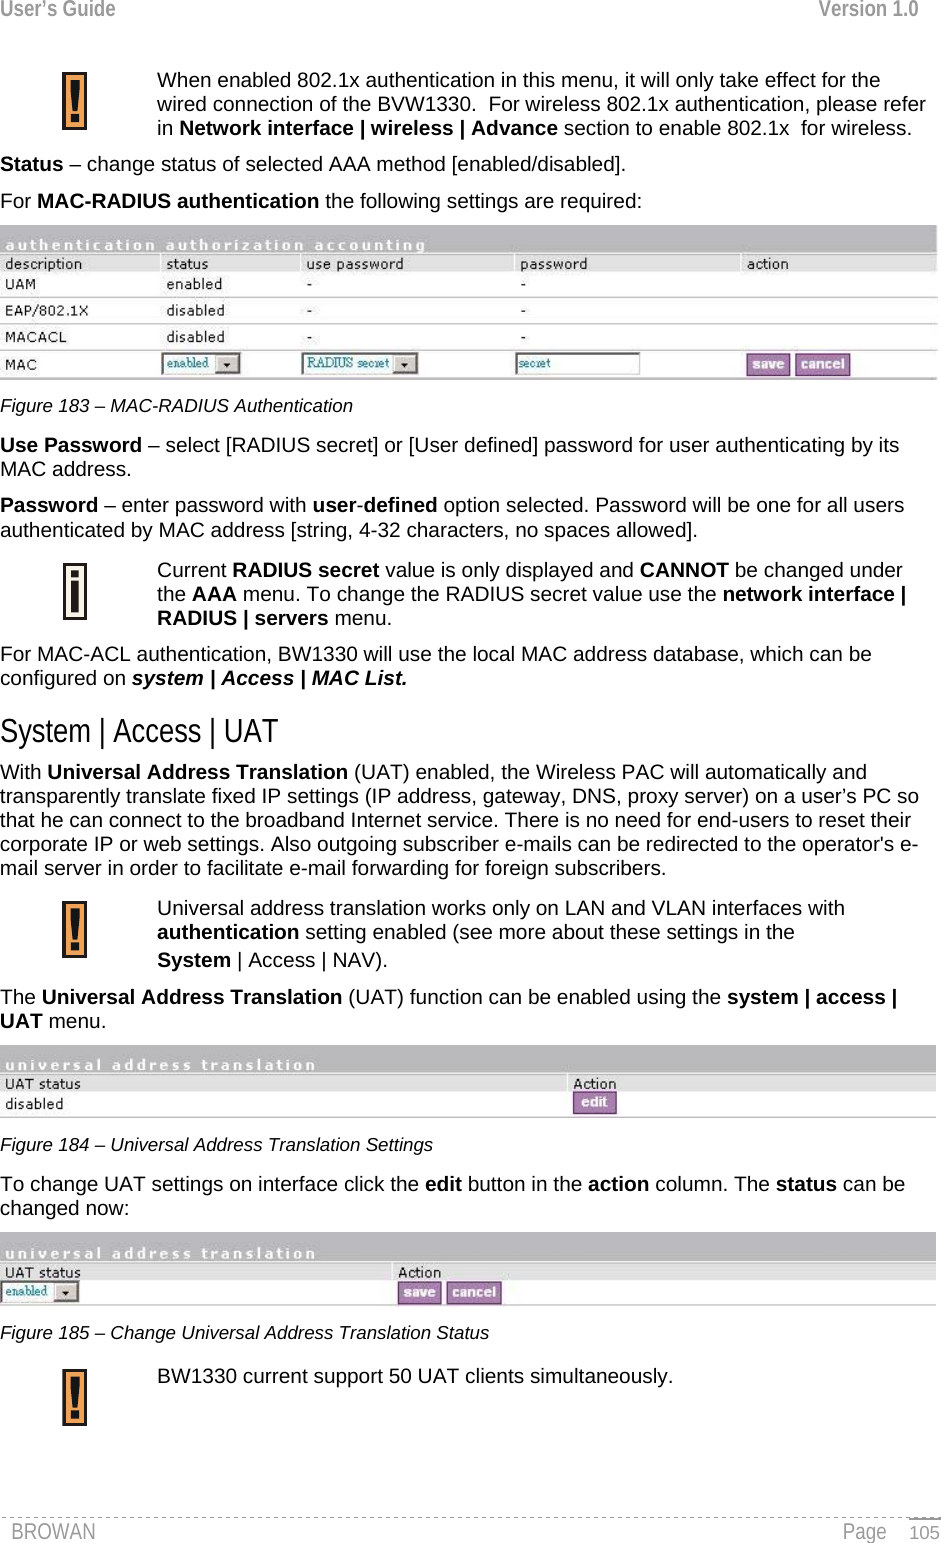 User’s Guide  Version 1.0   When enabled 802.1x authentication in this menu, it will only take effect for the wired connection of the BVW1330.  For wireless 802.1x authentication, please refer in Network interface | wireless | Advance section to enable 802.1x  for wireless. Status – change status of selected AAA method [enabled/disabled]. For MAC-RADIUS authentication the following settings are required:  Figure 183 – MAC-RADIUS Authentication Use Password – select [RADIUS secret] or [User defined] password for user authenticating by its MAC address.  Password – enter password with user-defined option selected. Password will be one for all users authenticated by MAC address [string, 4-32 characters, no spaces allowed]. Current RADIUS secret value is only displayed and CANNOT be changed under the AAA menu. To change the RADIUS secret value use the network interface | RADIUS | servers menu.   For MAC-ACL authentication, BW1330 will use the local MAC address database, which can be configured on system | Access | MAC List. System | Access | UAT With Universal Address Translation (UAT) enabled, the Wireless PAC will automatically and transparently translate fixed IP settings (IP address, gateway, DNS, proxy server) on a user’s PC so that he can connect to the broadband Internet service. There is no need for end-users to reset their corporate IP or web settings. Also outgoing subscriber e-mails can be redirected to the operator&apos;s e-mail server in order to facilitate e-mail forwarding for foreign subscribers.   Universal address translation works only on LAN and VLAN interfaces with authentication setting enabled (see more about these settings in the  System | Access | NAV). The Universal Address Translation (UAT) function can be enabled using the system | access | UAT menu.  Figure 184 – Universal Address Translation Settings To change UAT settings on interface click the edit button in the action column. The status can be changed now:  Figure 185 – Change Universal Address Translation Status BW1330 current support 50 UAT clients simultaneously.   BROWAN                                                                                                                                               Page   105